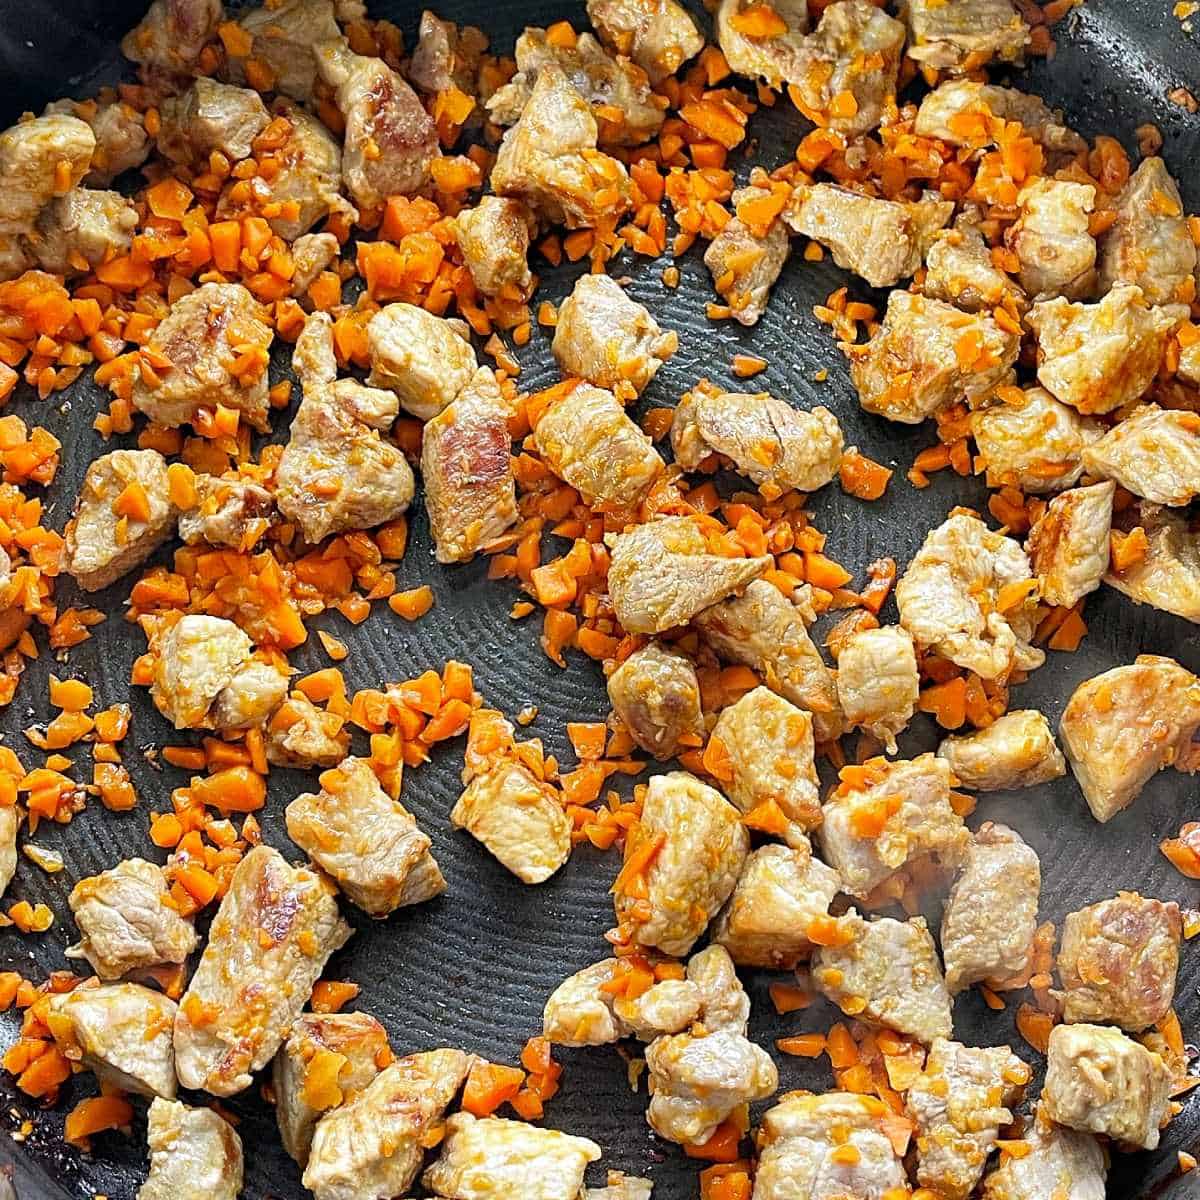 Cuded pork peices and diced carrot frying in a frypan.